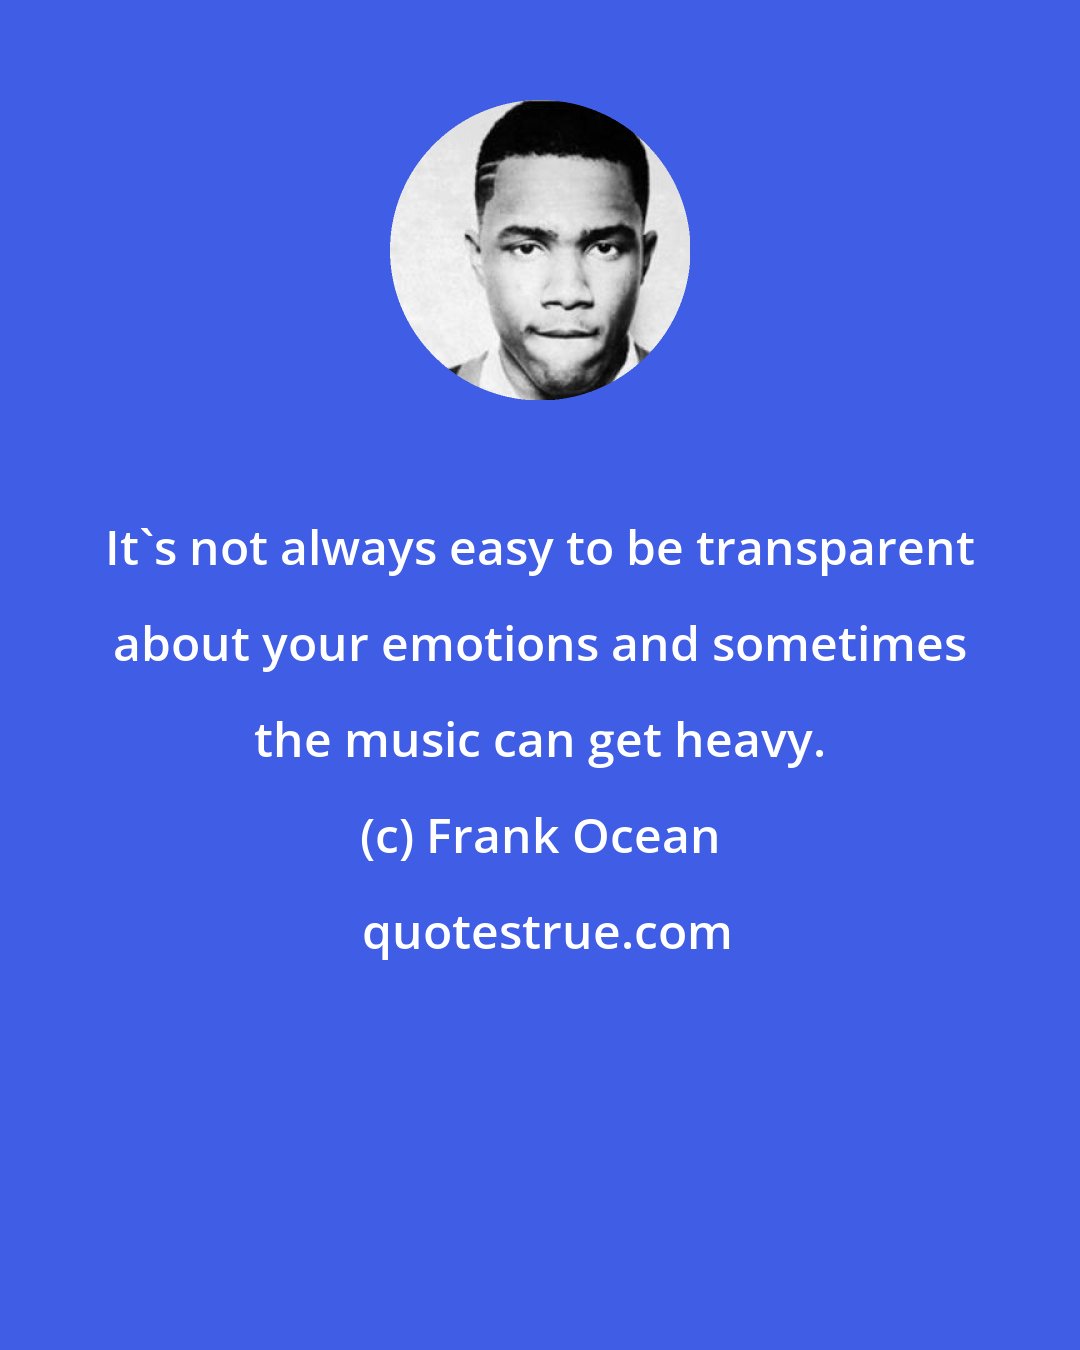 Frank Ocean: It's not always easy to be transparent about your emotions and sometimes the music can get heavy.